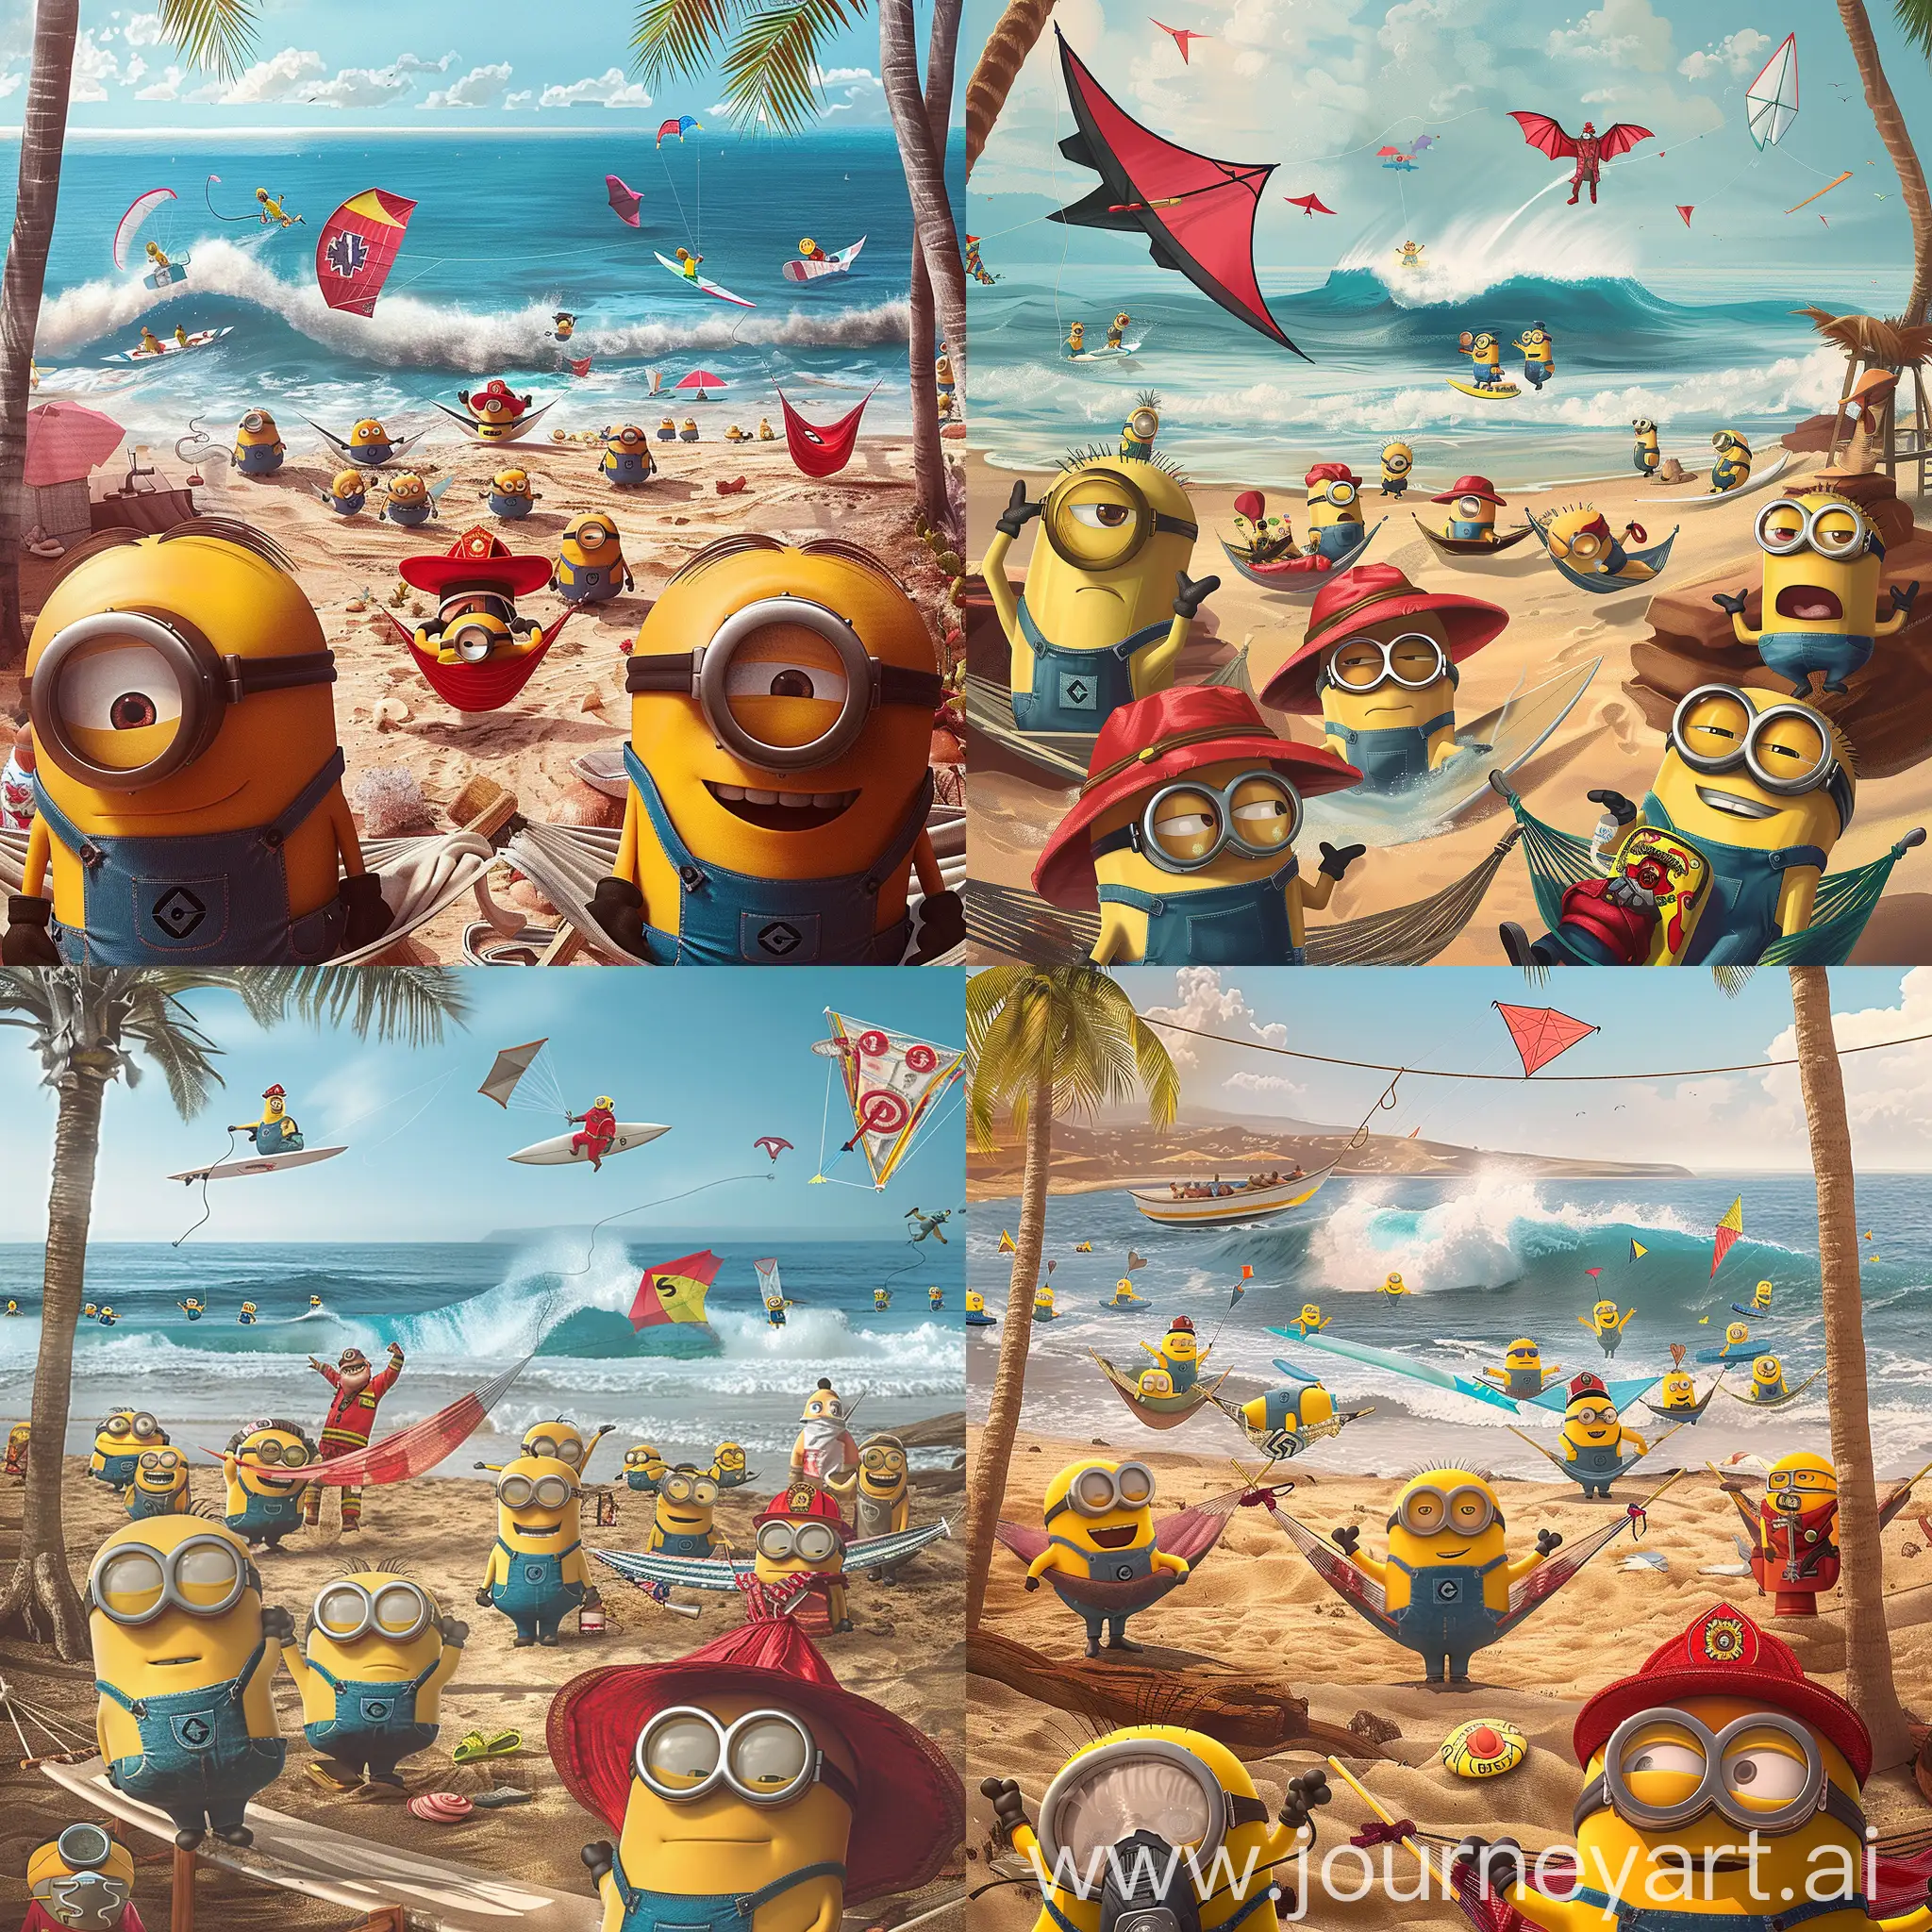 Generate an image description: A beach scene with the ocean in the background, where minions from the movie are relaxing on the beach. Some are lounging in hammocks, others are flying kites, and one minion (dressed as a firefighter) is surfing a wave on a surfboard. In the foreground, two minions stand out - one is wearing a red panama hat, and the other is wearing a medical mask